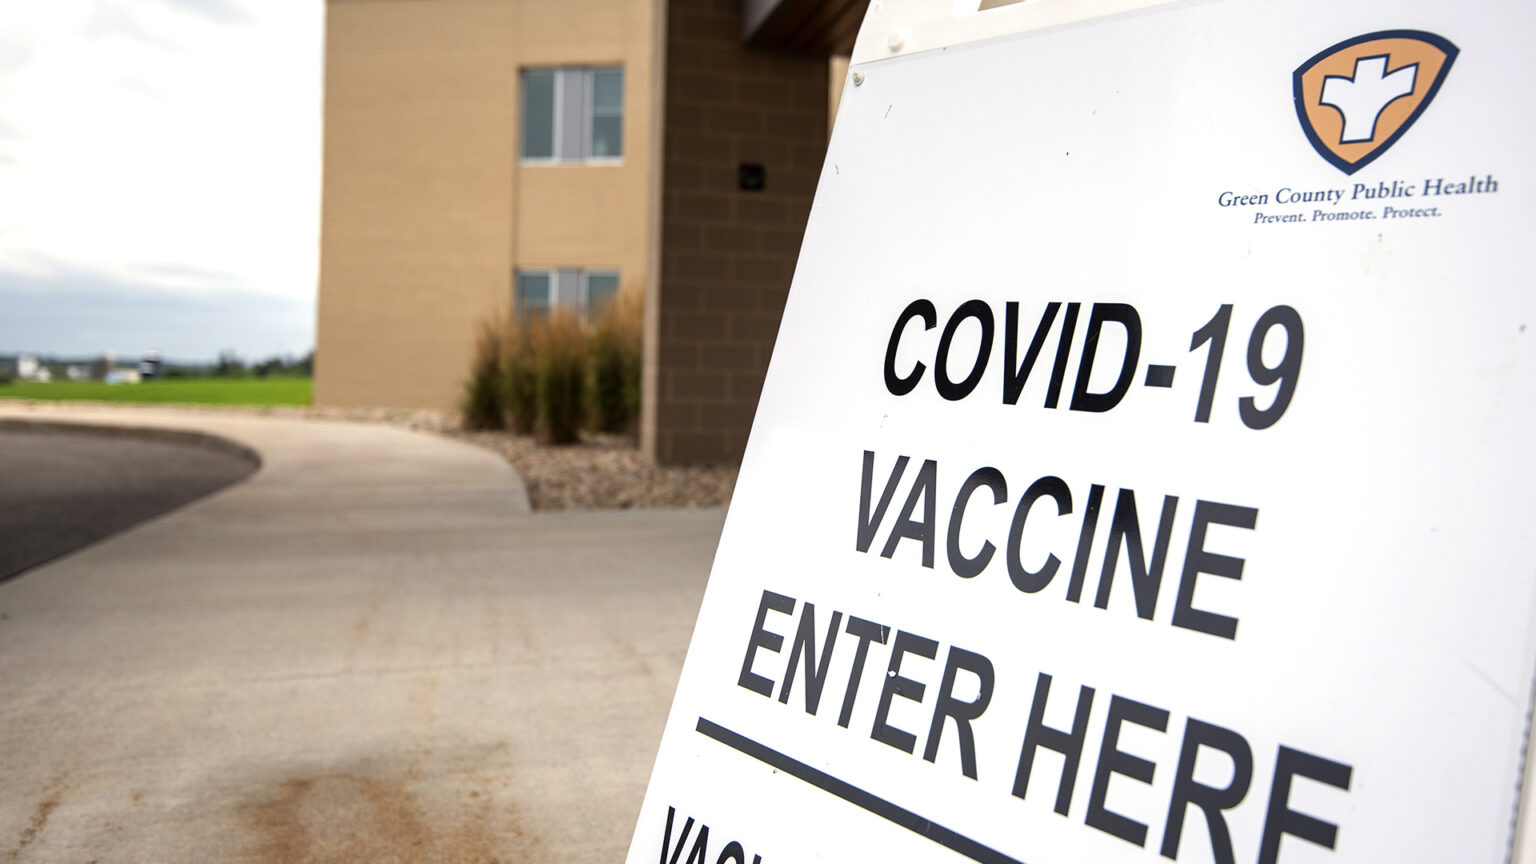 A sidewalk sign reading COVID-19 Vaccine Enter Here stands in front of a building entrance.